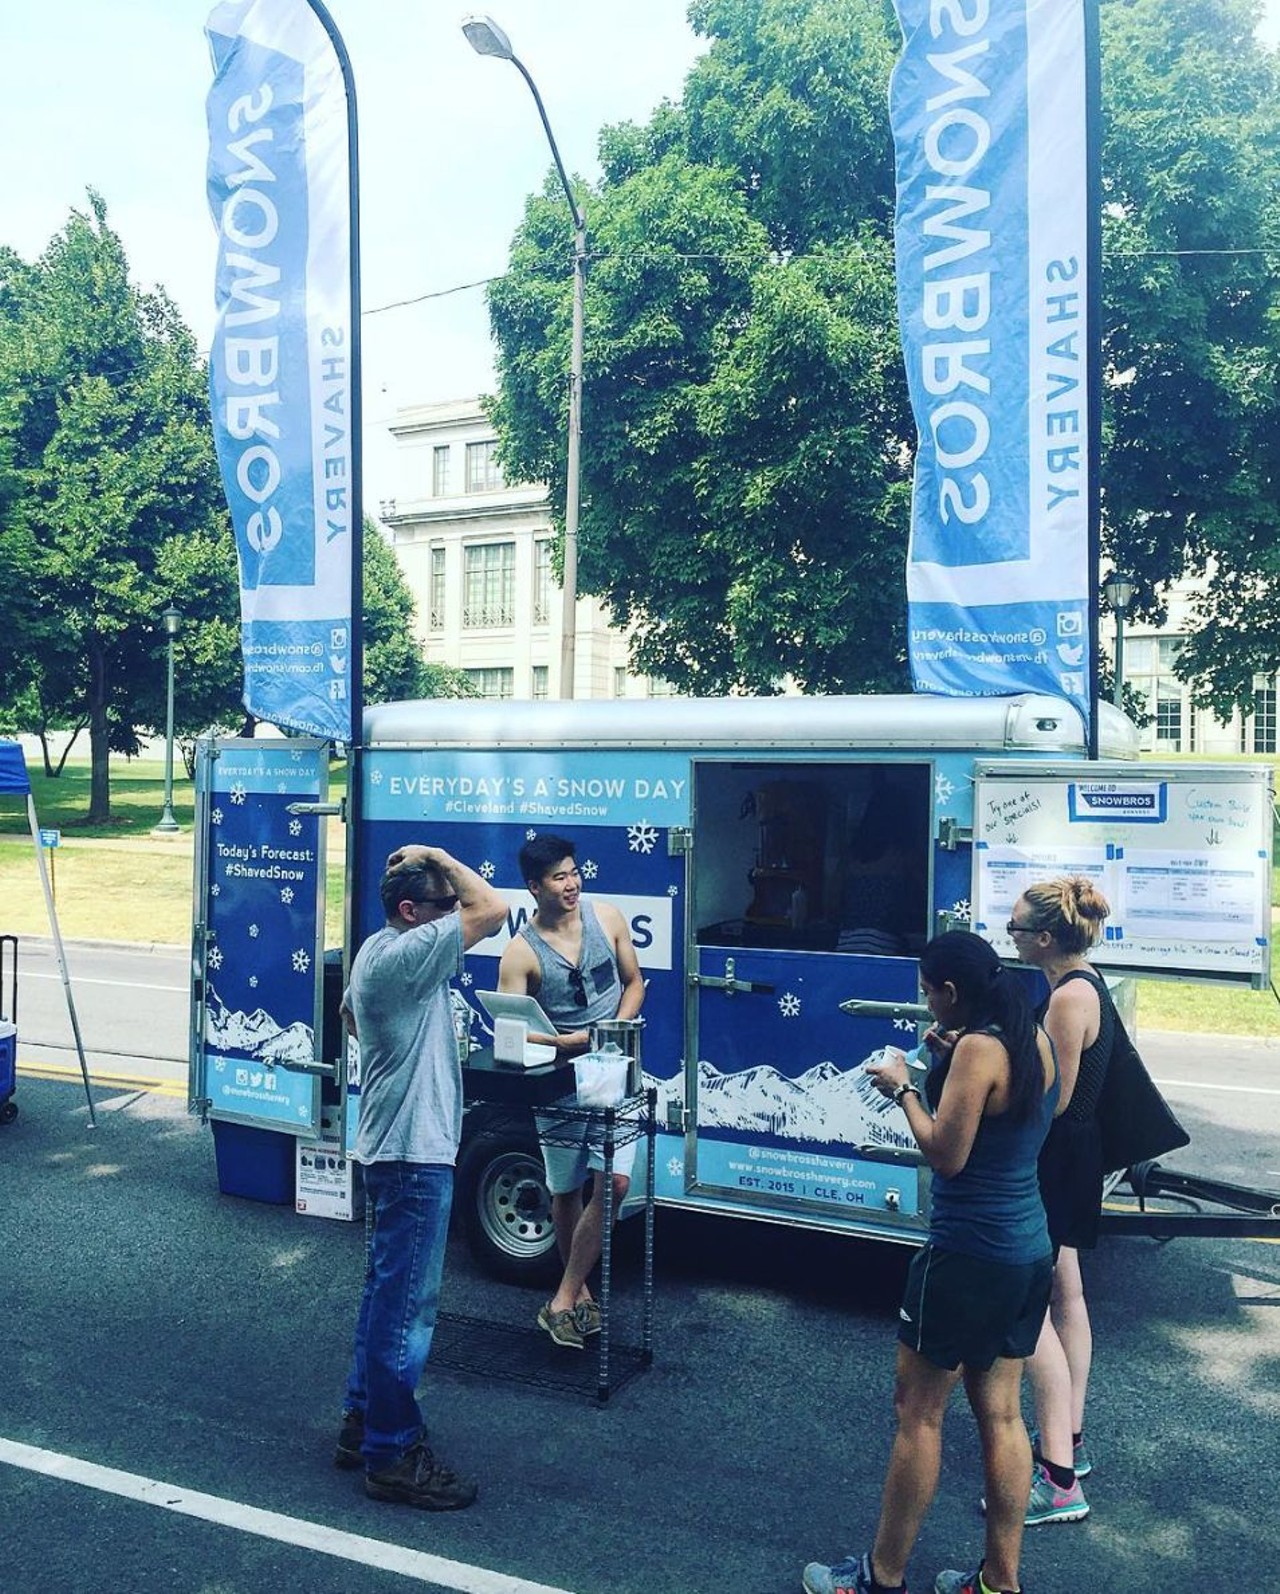  SnowBros Shavery
This food truck appears at several Cleveland festivals, check their website for upcoming locations.
Photo via kid_indie13/Instagram